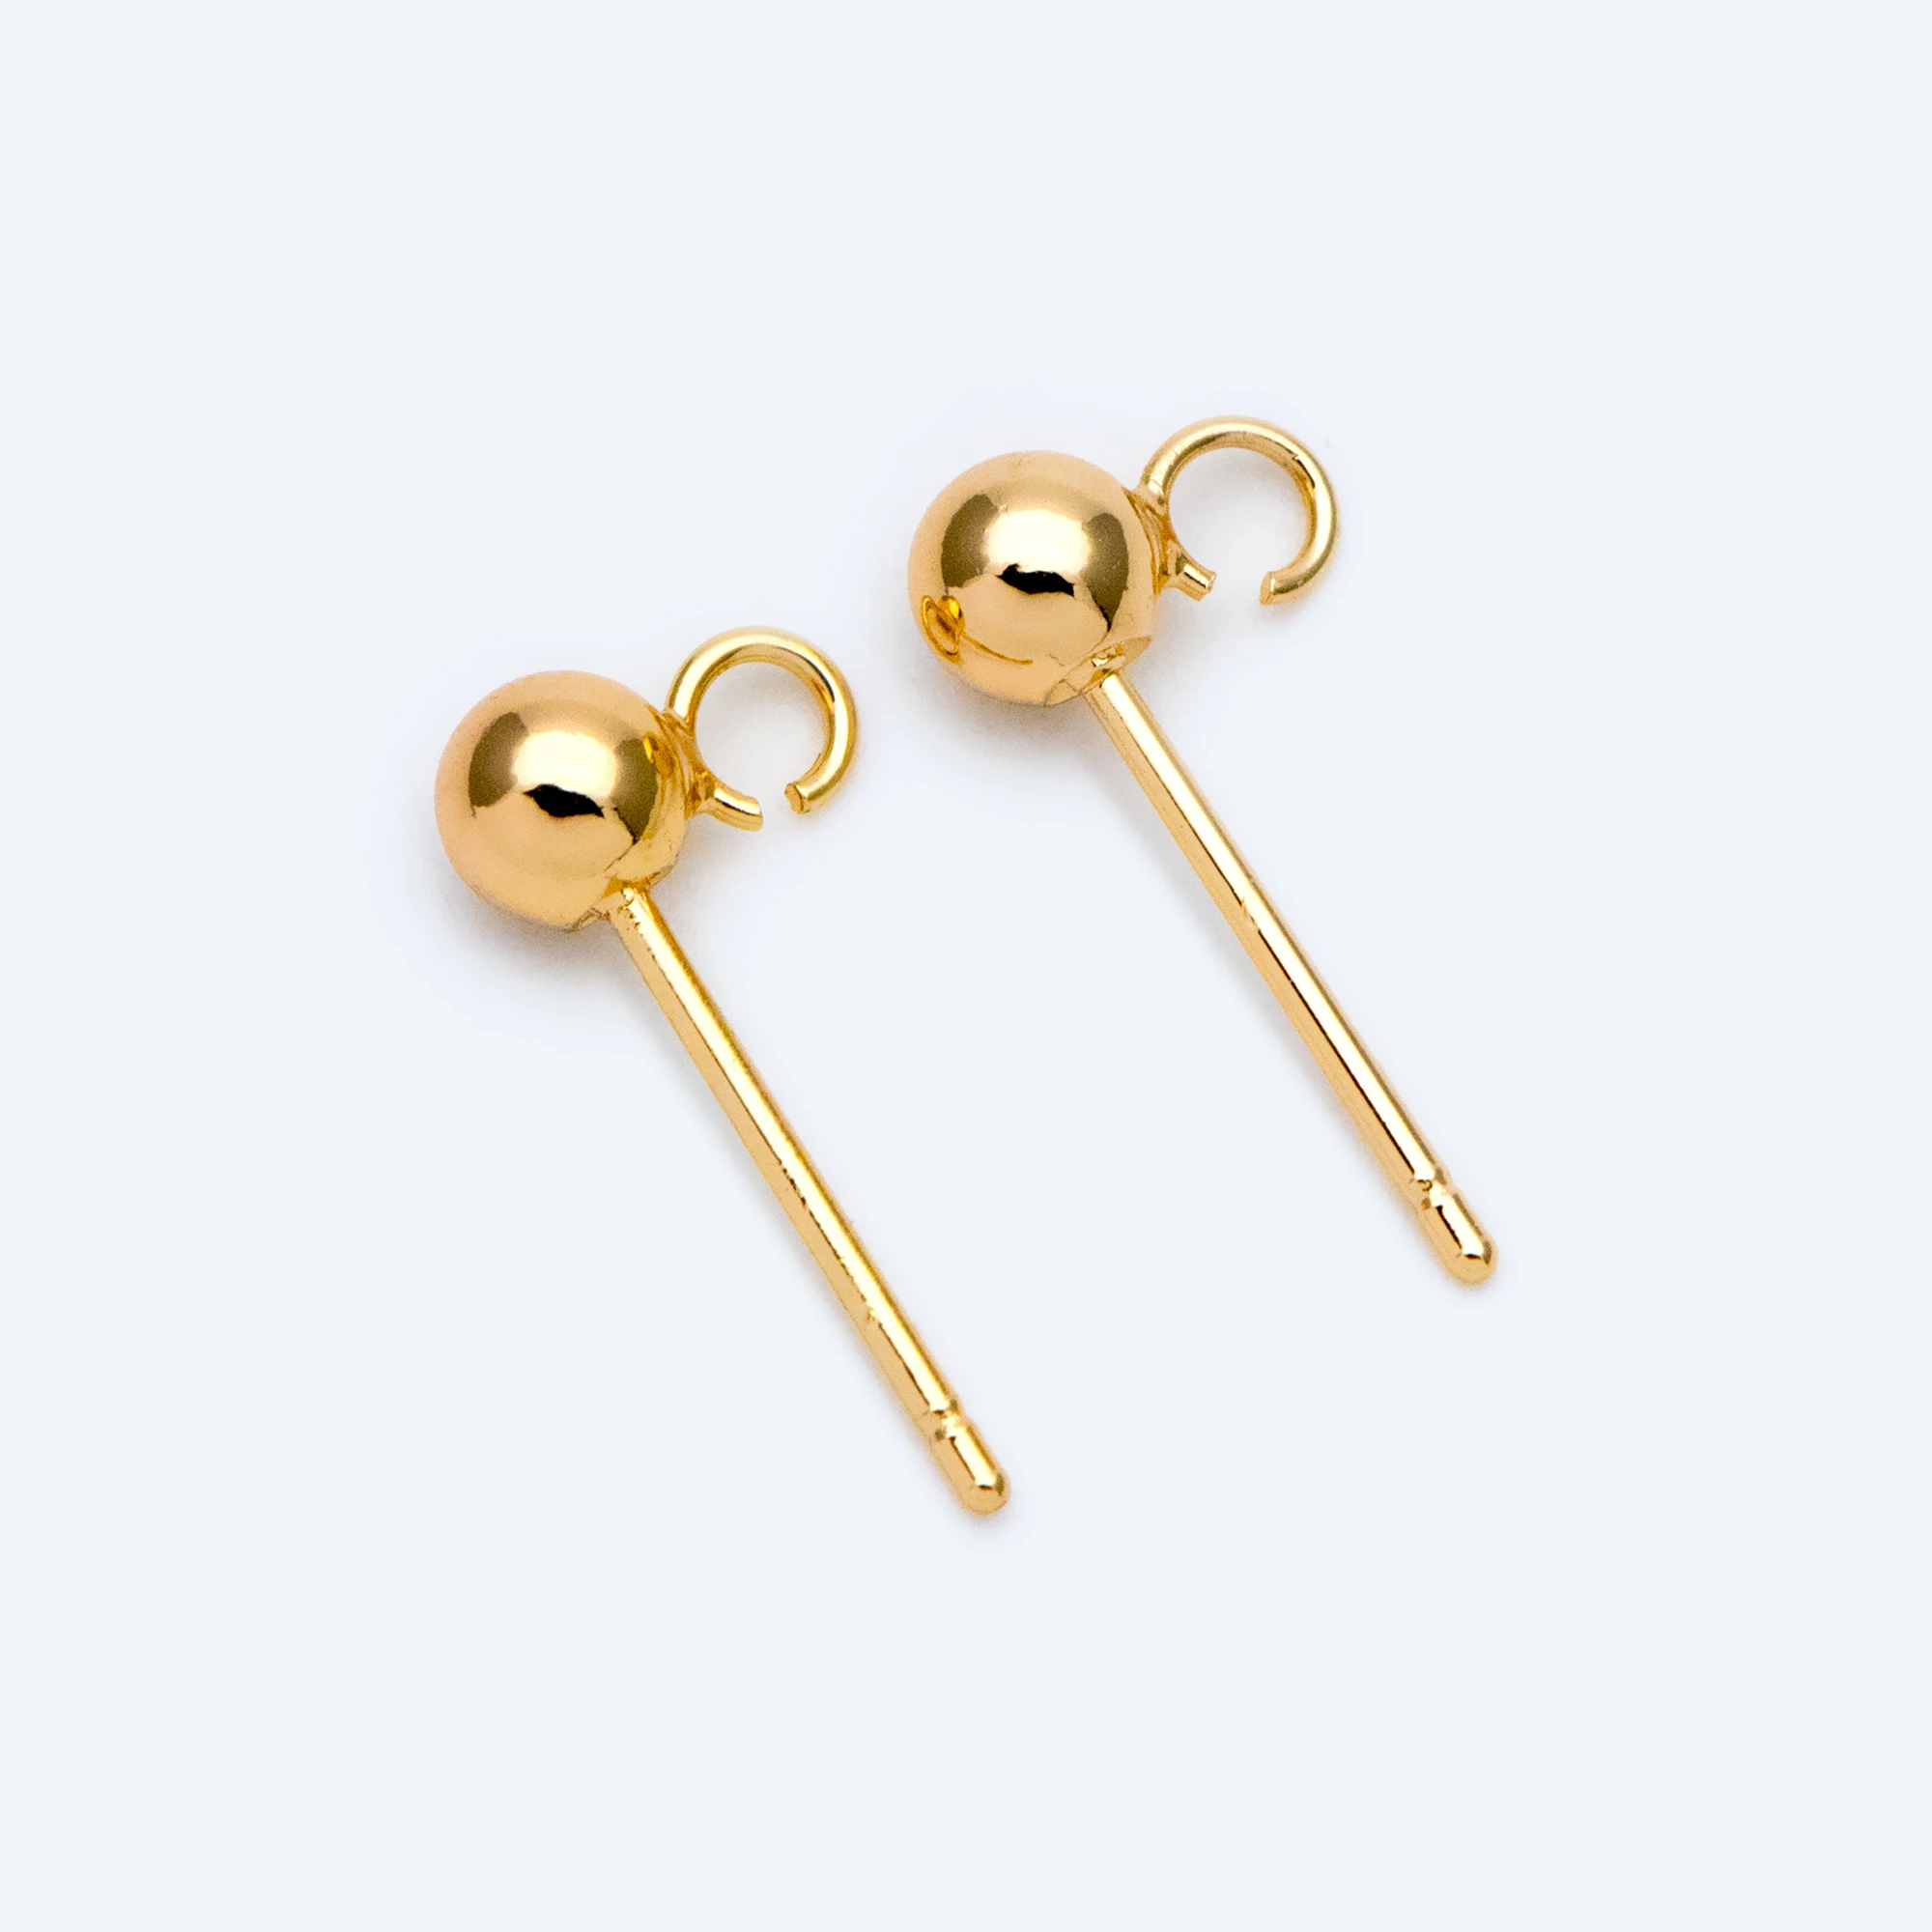 

20pcs Gold/ Rhodium plated Brass Stud Earring, Ball Ear Posts with Open Ring/ Loop, 4mm Ball Size (GB-1512)